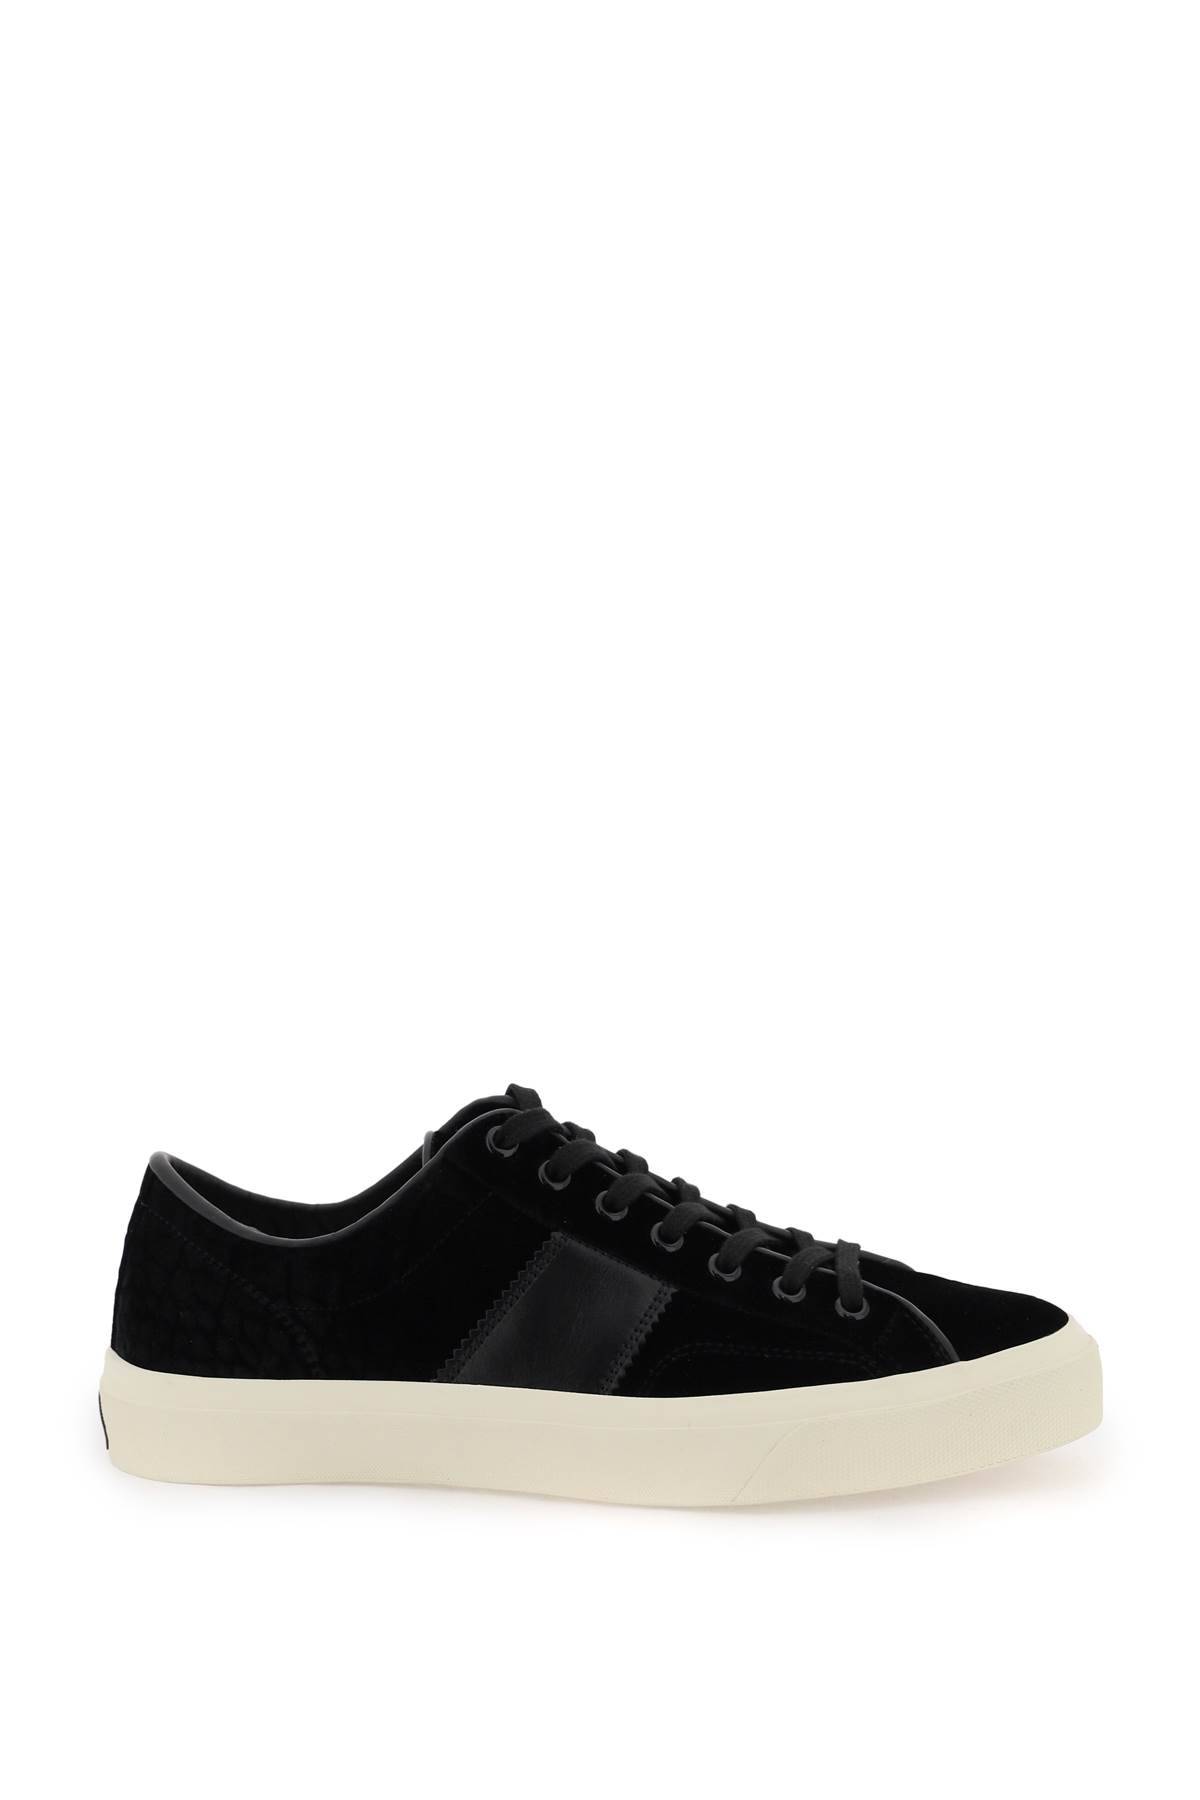 Tom Ford Cambridge Trainers In Black